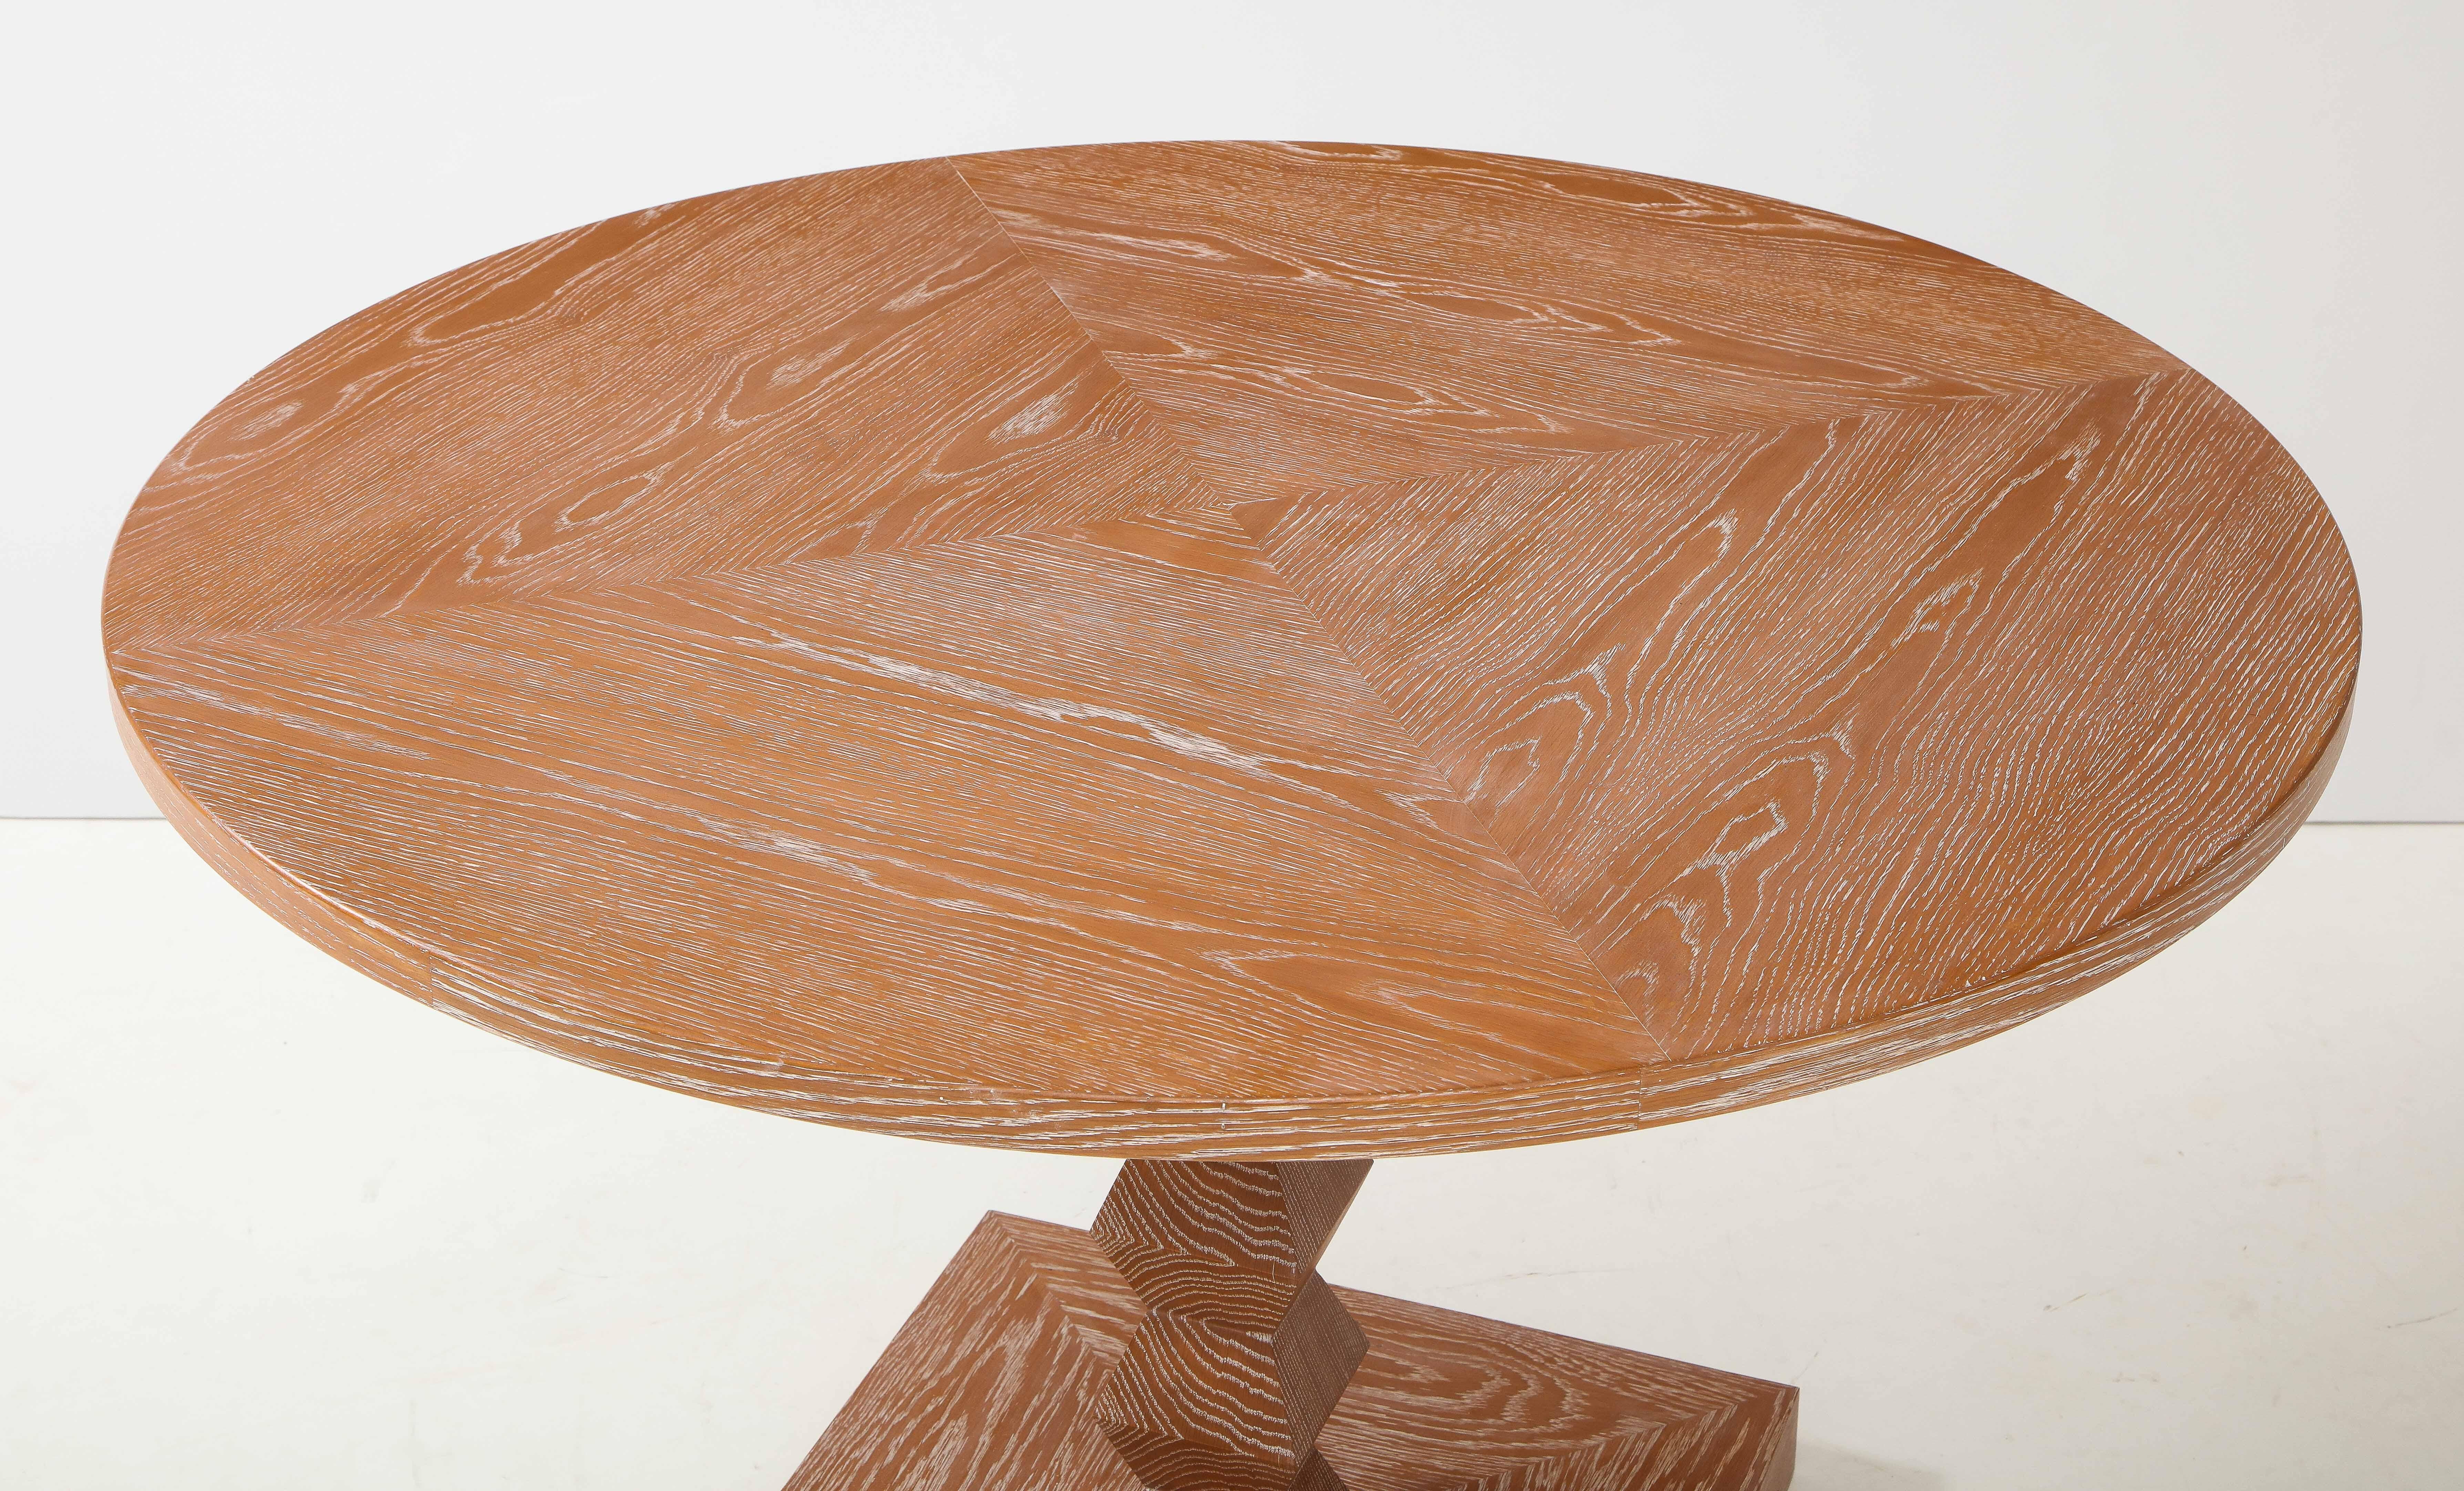 Custom Cerused Oak Center Table Inspired by French, 1940s Design For Sale 3